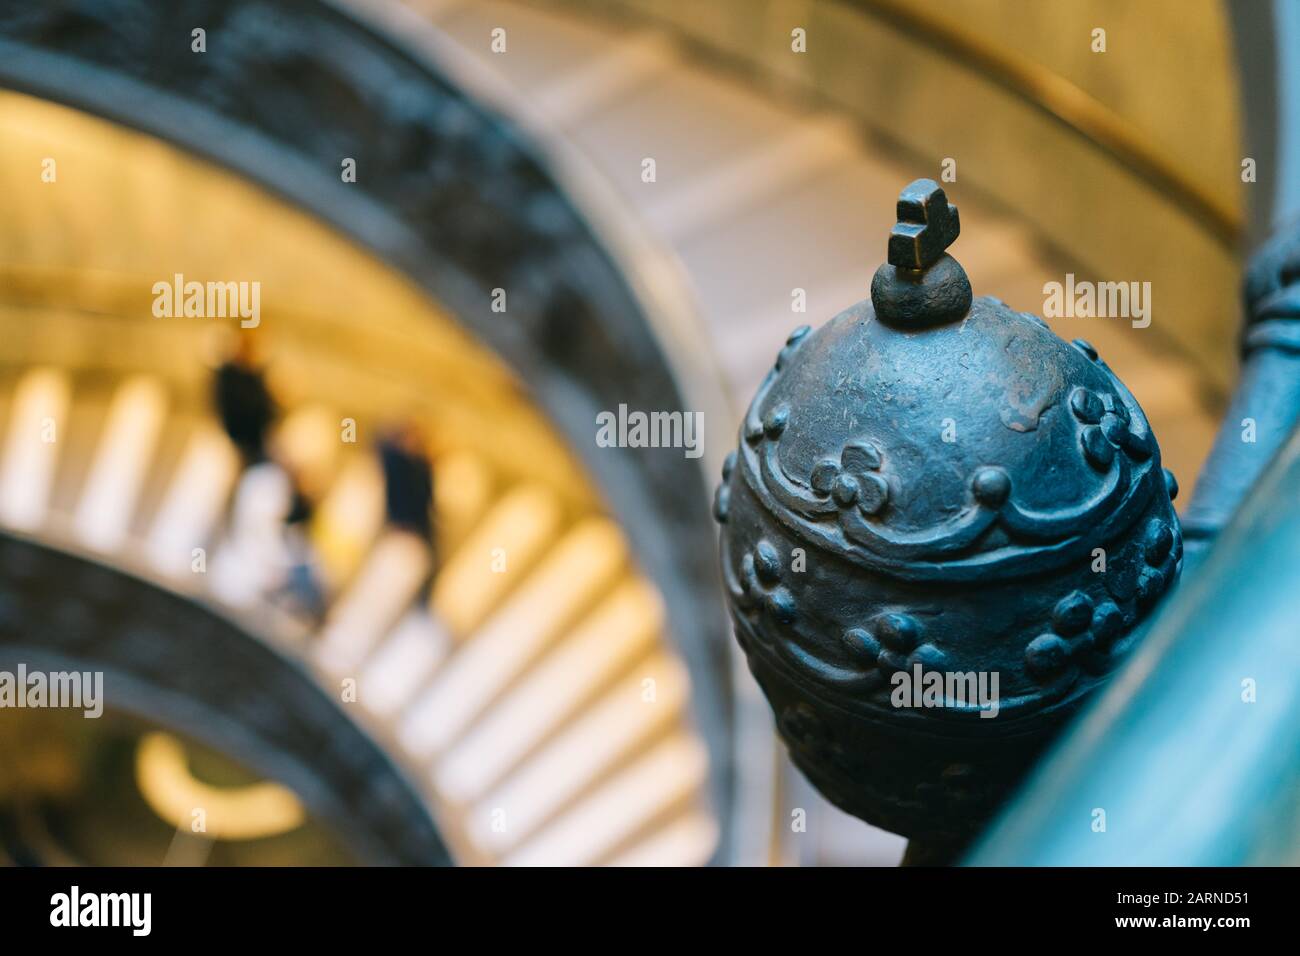 Rome, Italy - Jan 3, 2020: Detail of the famous spiral stairway at the Vatican museum in Rome Italy Stock Photo